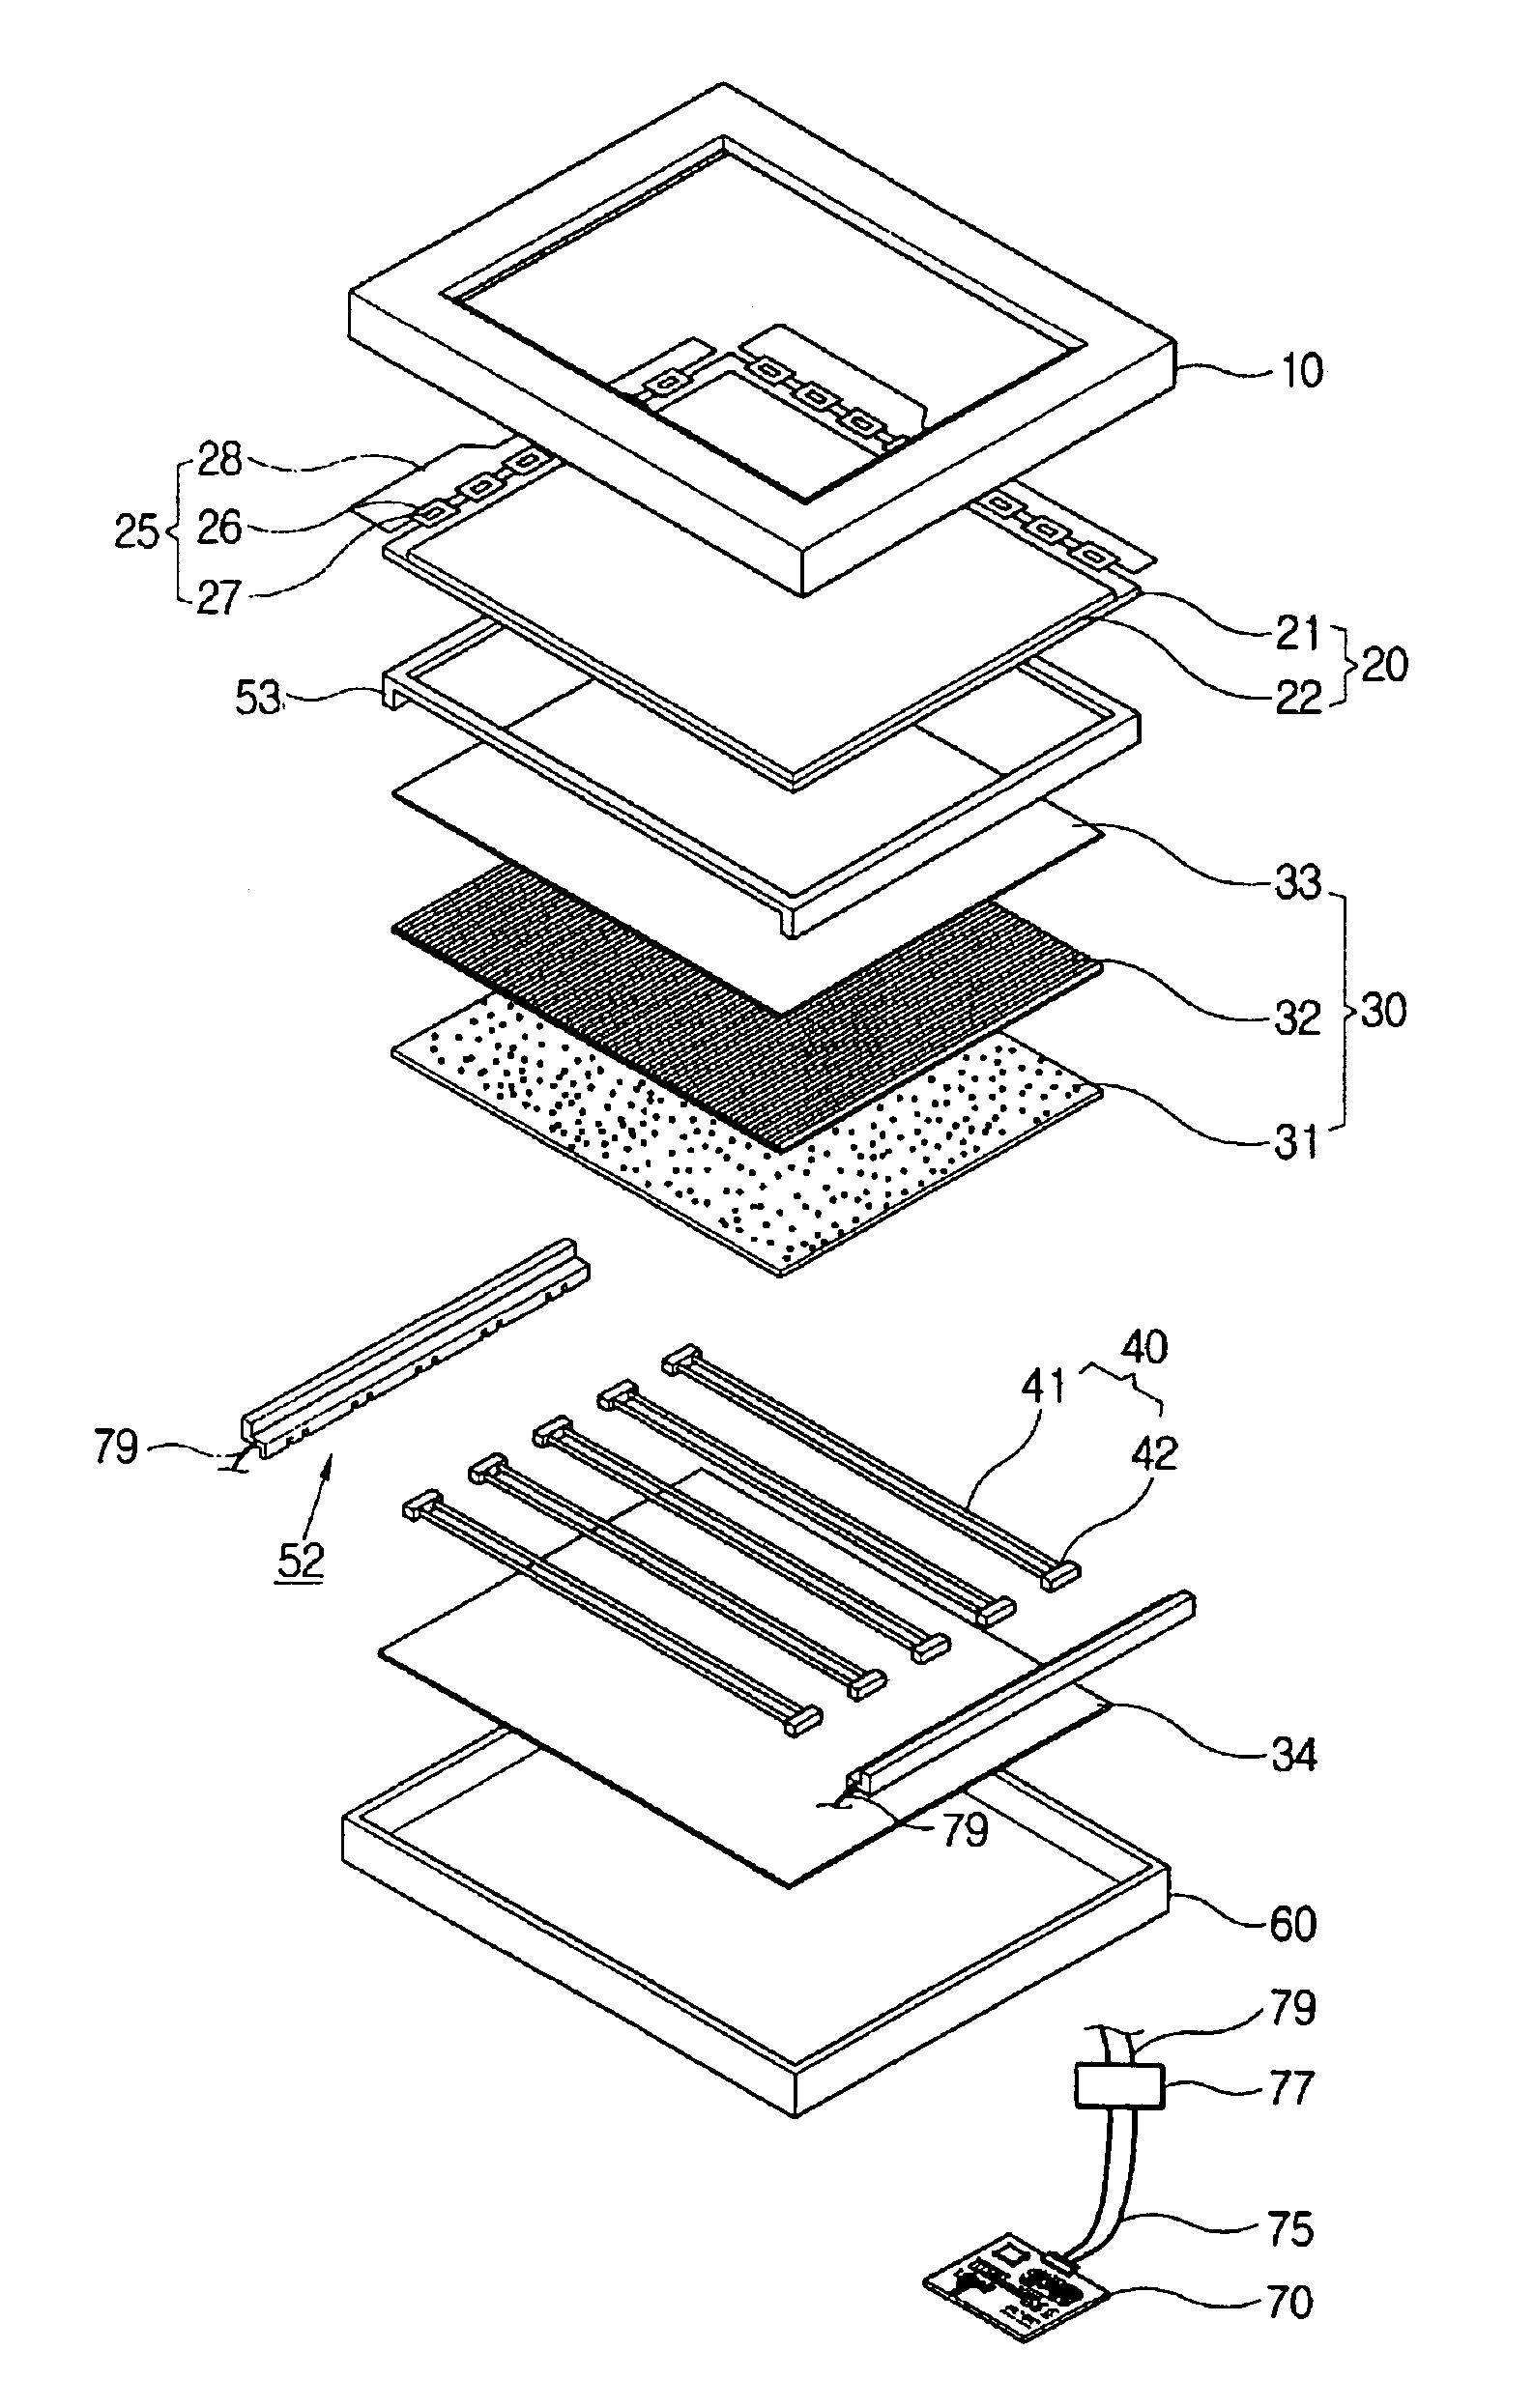 Display apparatus and power supplying apparatus for lamp unit thereof